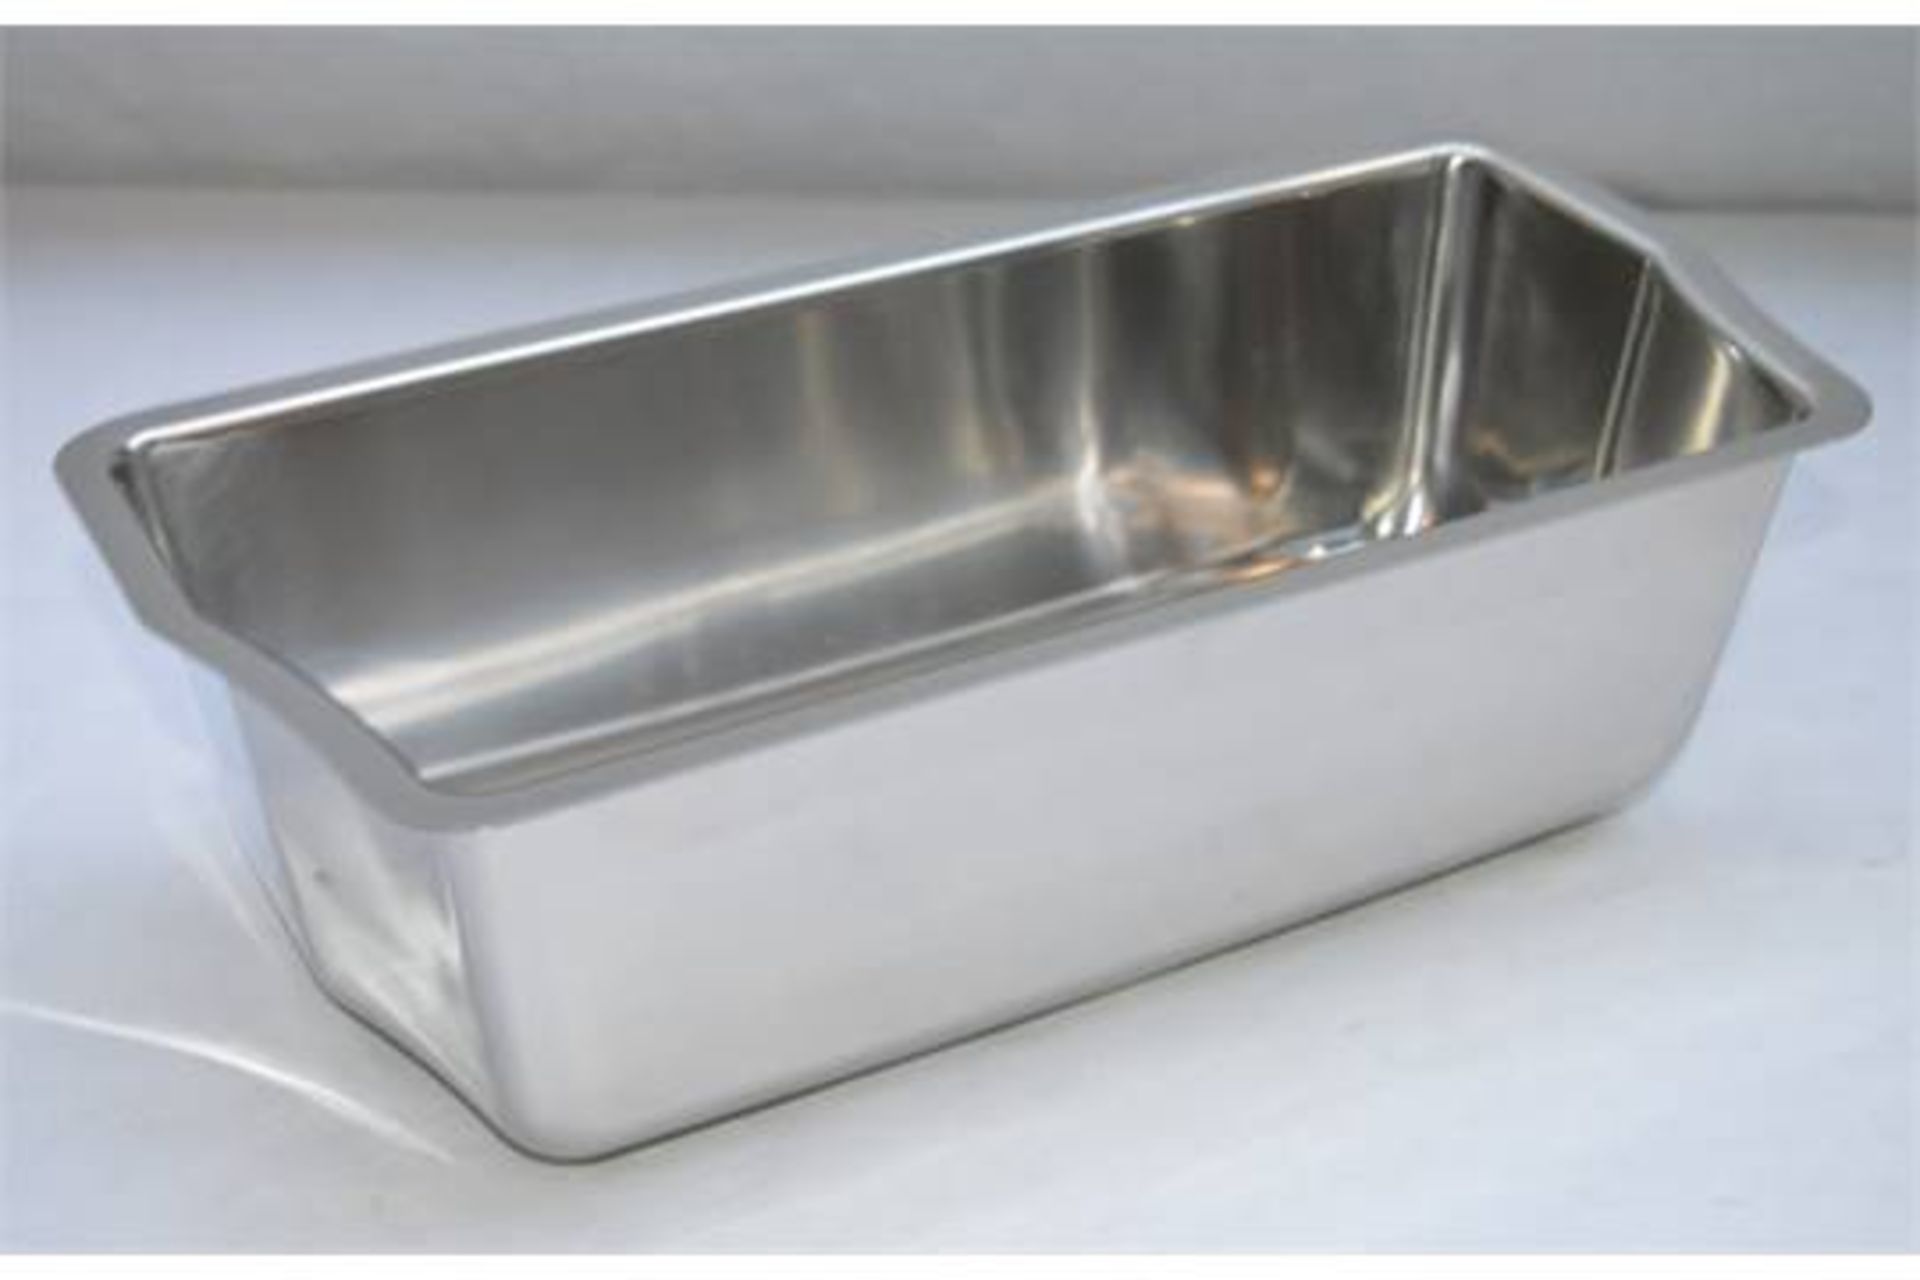 25 x Hurricane Kitchen Stainer Bowls - High Quality Stainless Steel Finish 37 x 18 x 12 cms - - Image 3 of 5